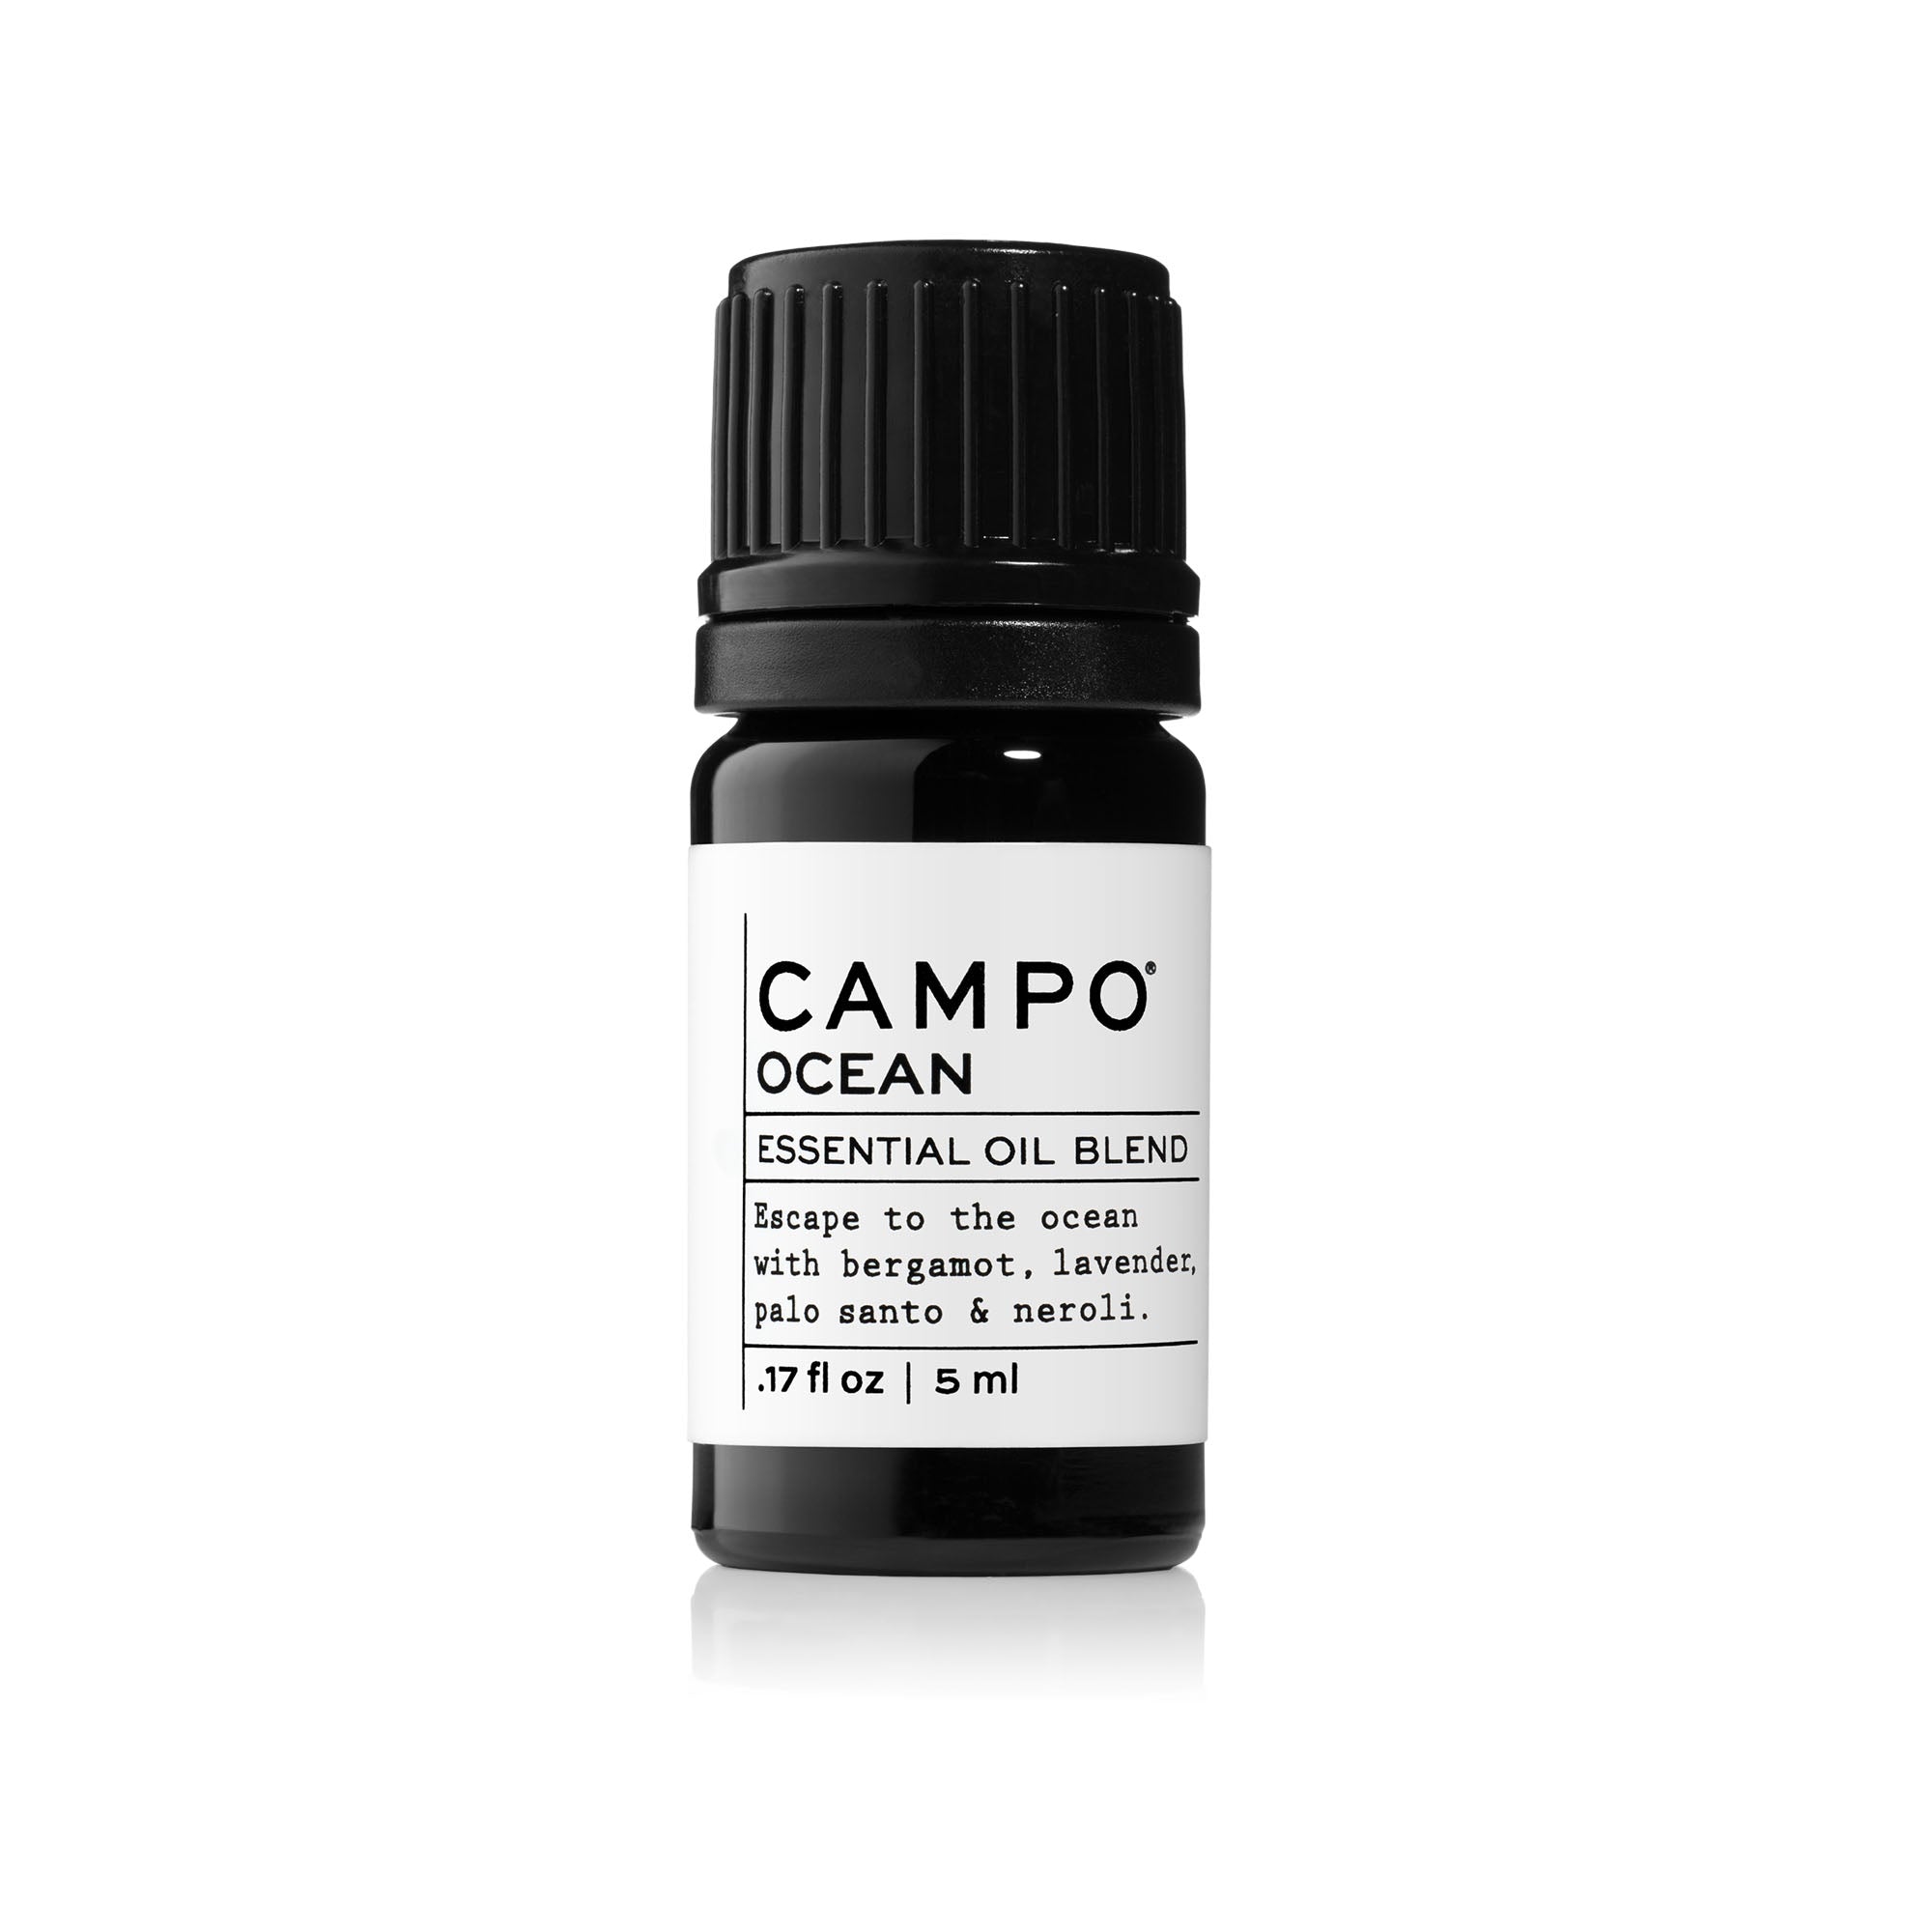 Campo Beauty OCEAN Blend 15 ml Essential Oil. Escape to the ocean with this 100% pure essential oil blend of neroli, palo santo, lavender and bergamot.